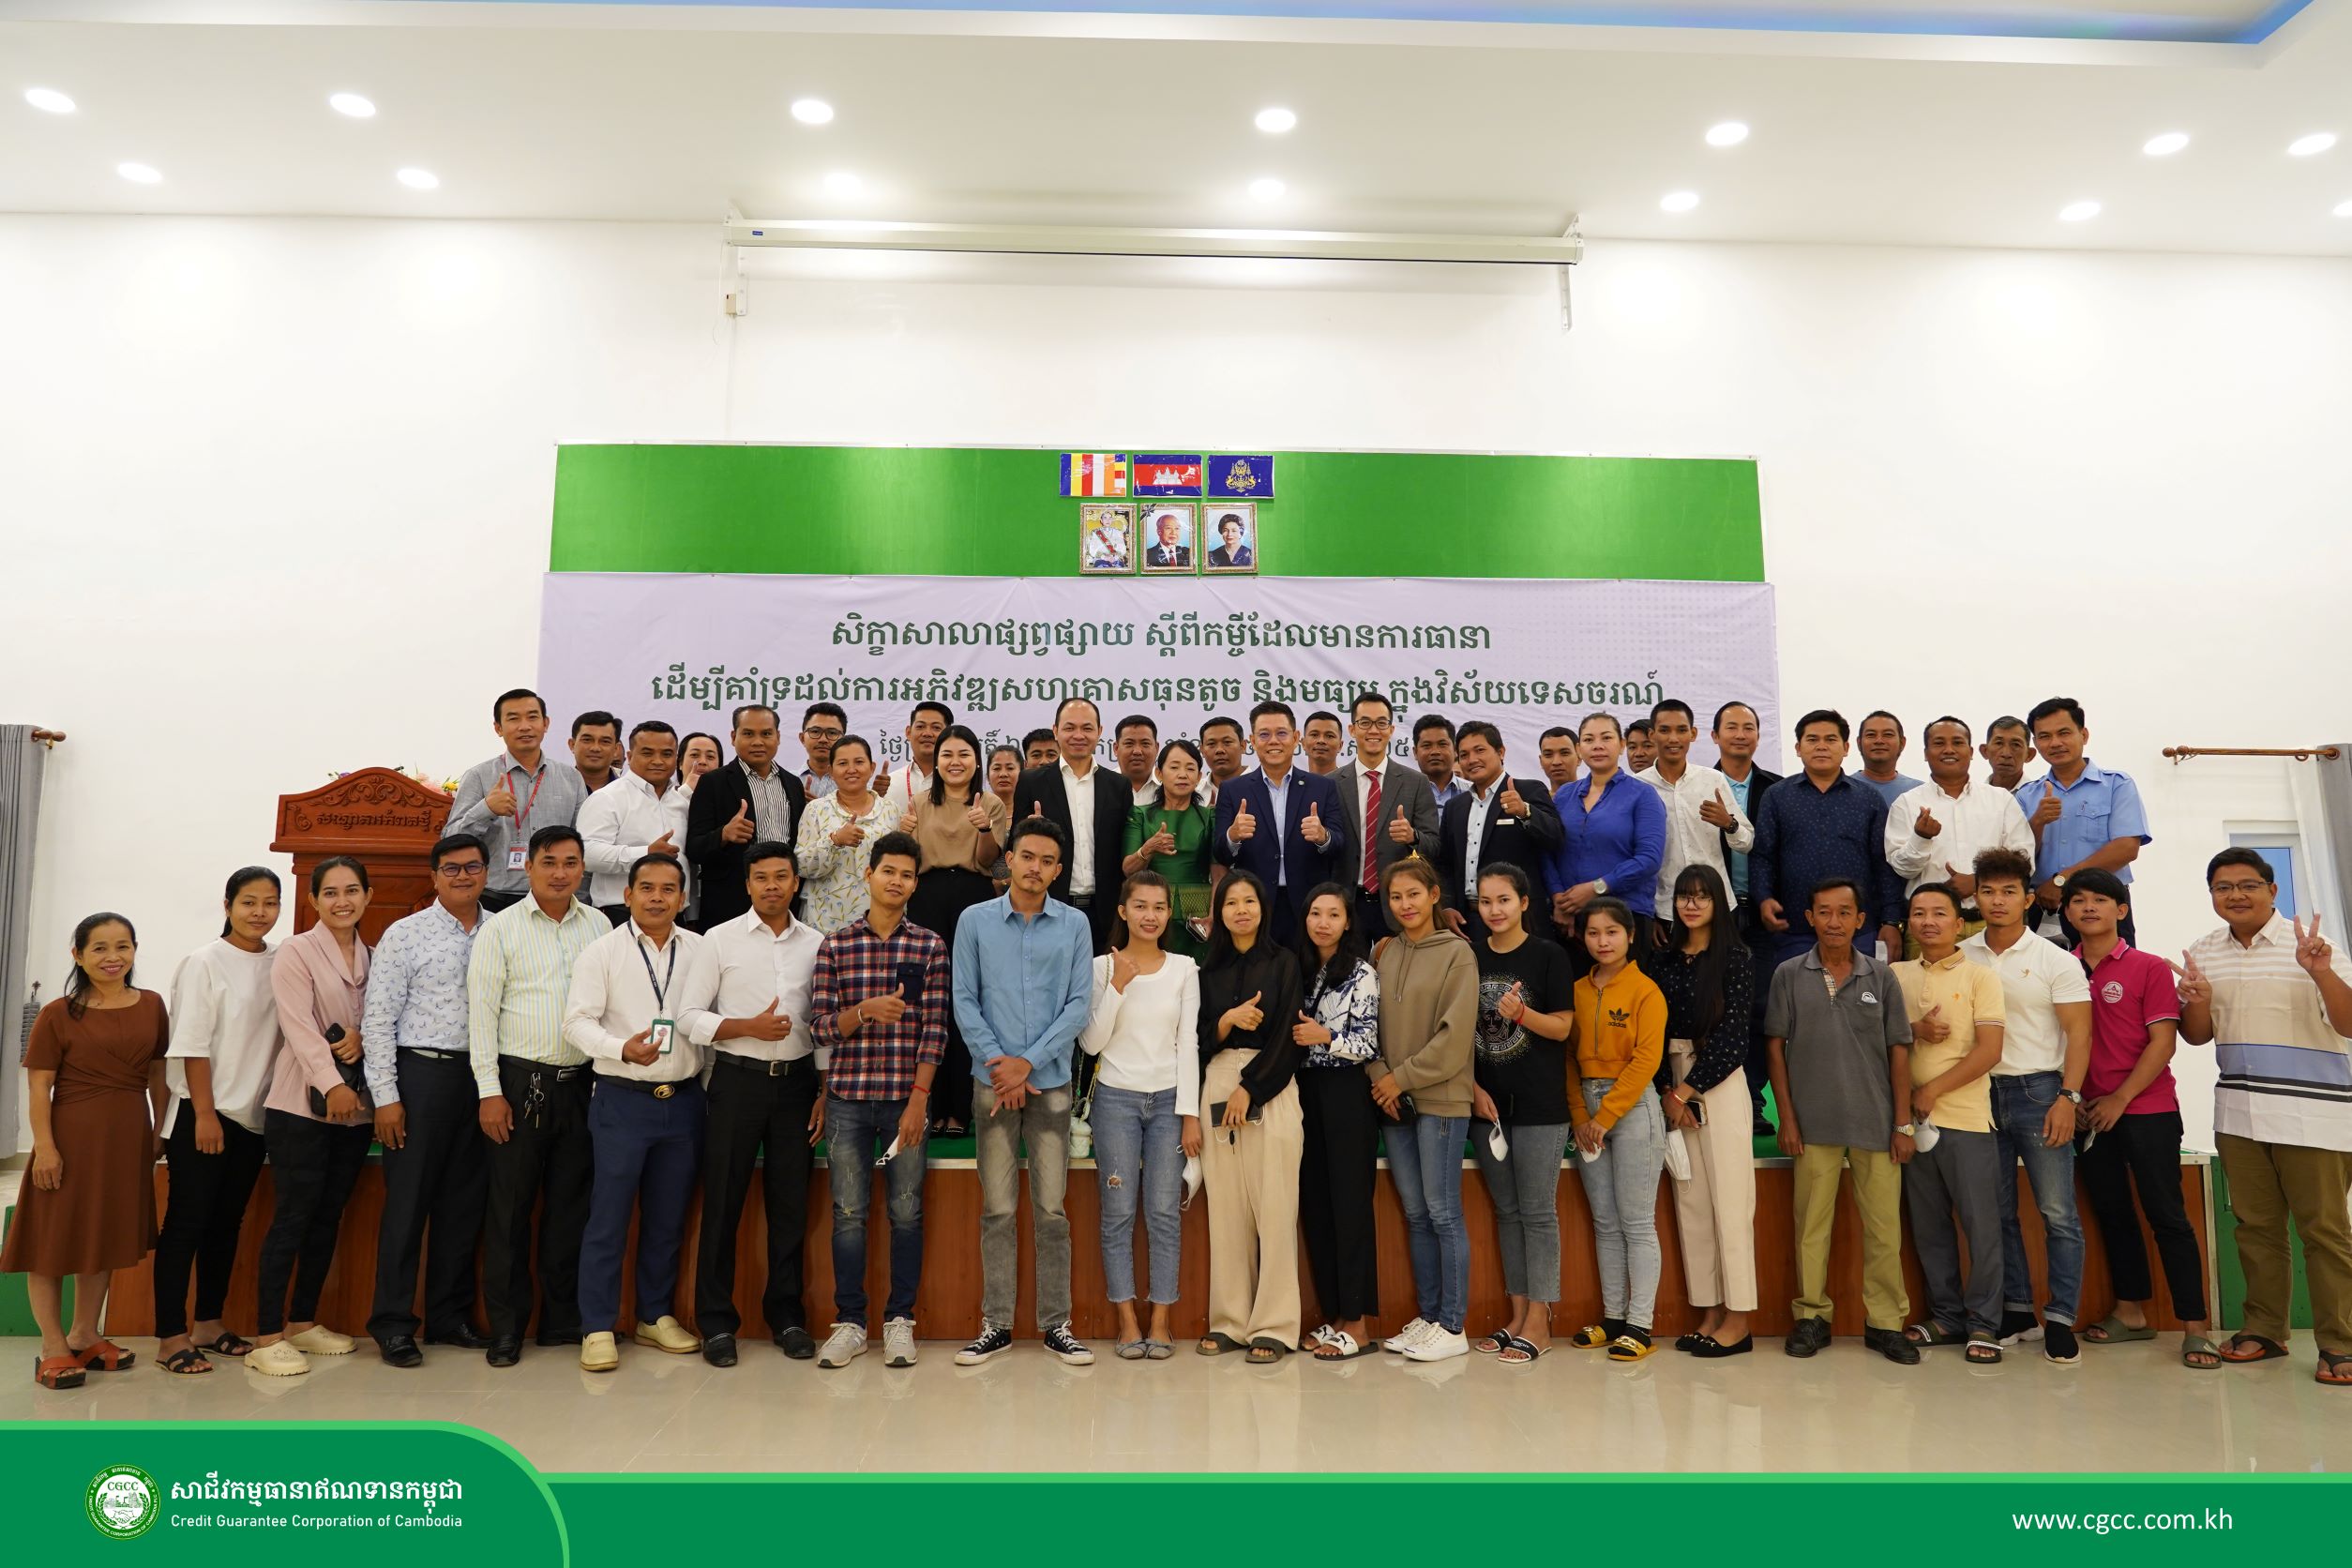 Dissemination Seminar on “Guaranteed Loans to support SMEs Development in Tourism Sector” organized by CGCC on 1 September 2022 in Kampot Province